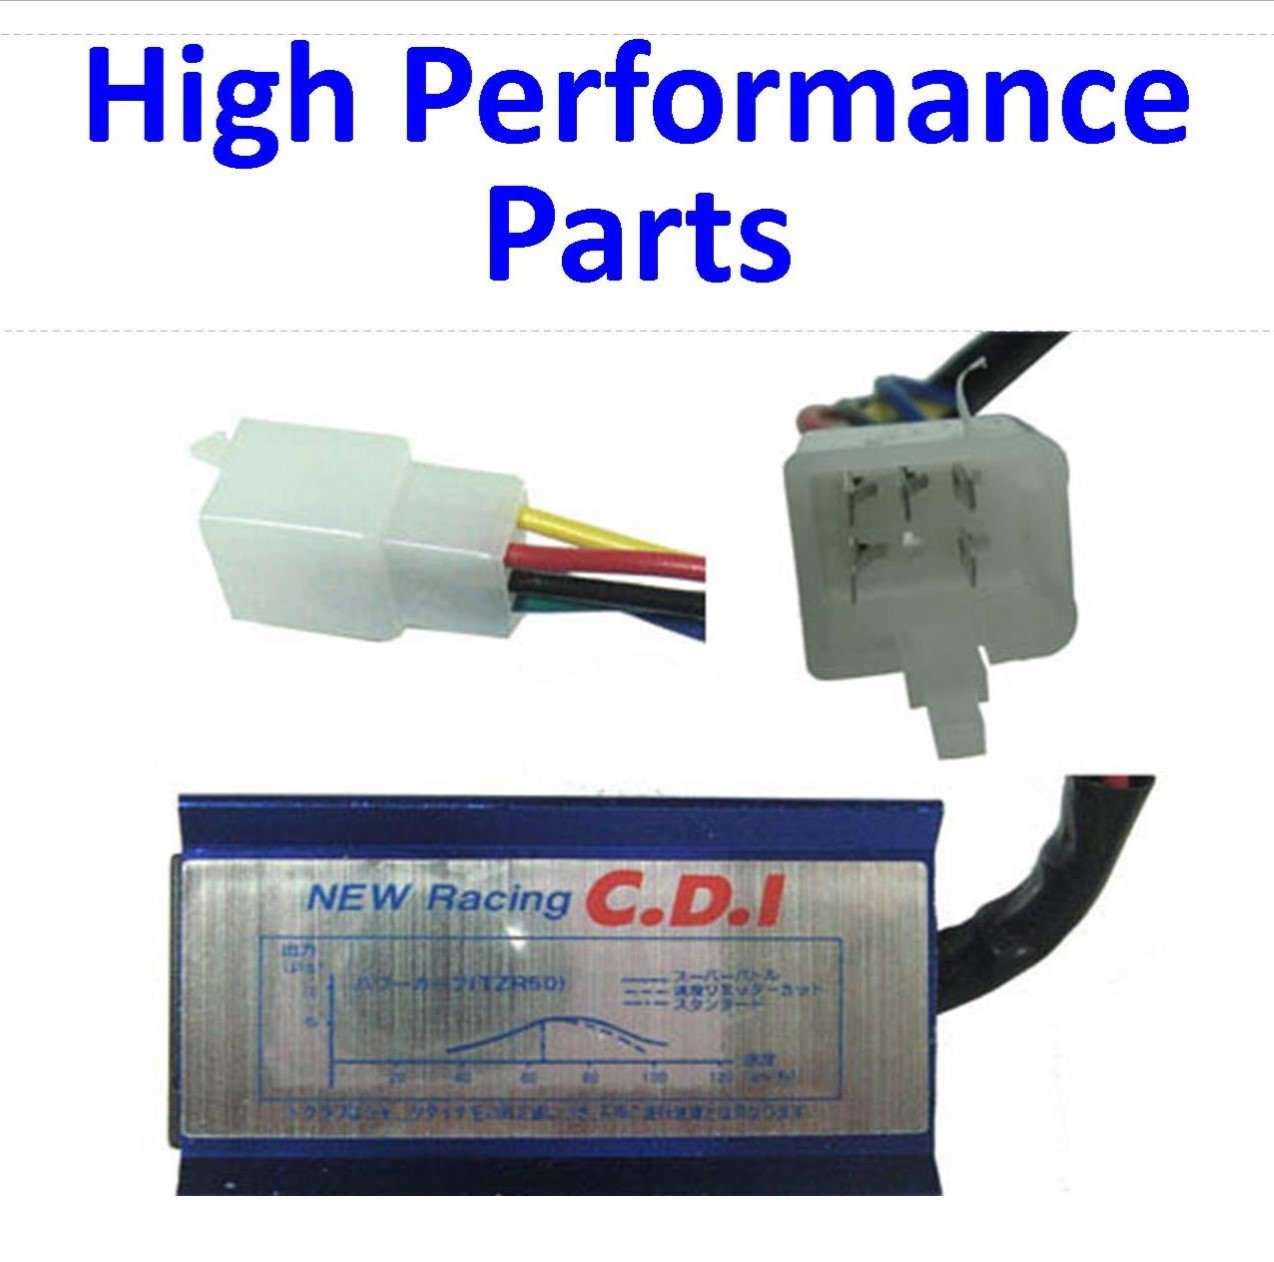 High Performance Parts For 49-125cc Honda Type Engines Used On ATVs & Dirt Bikes